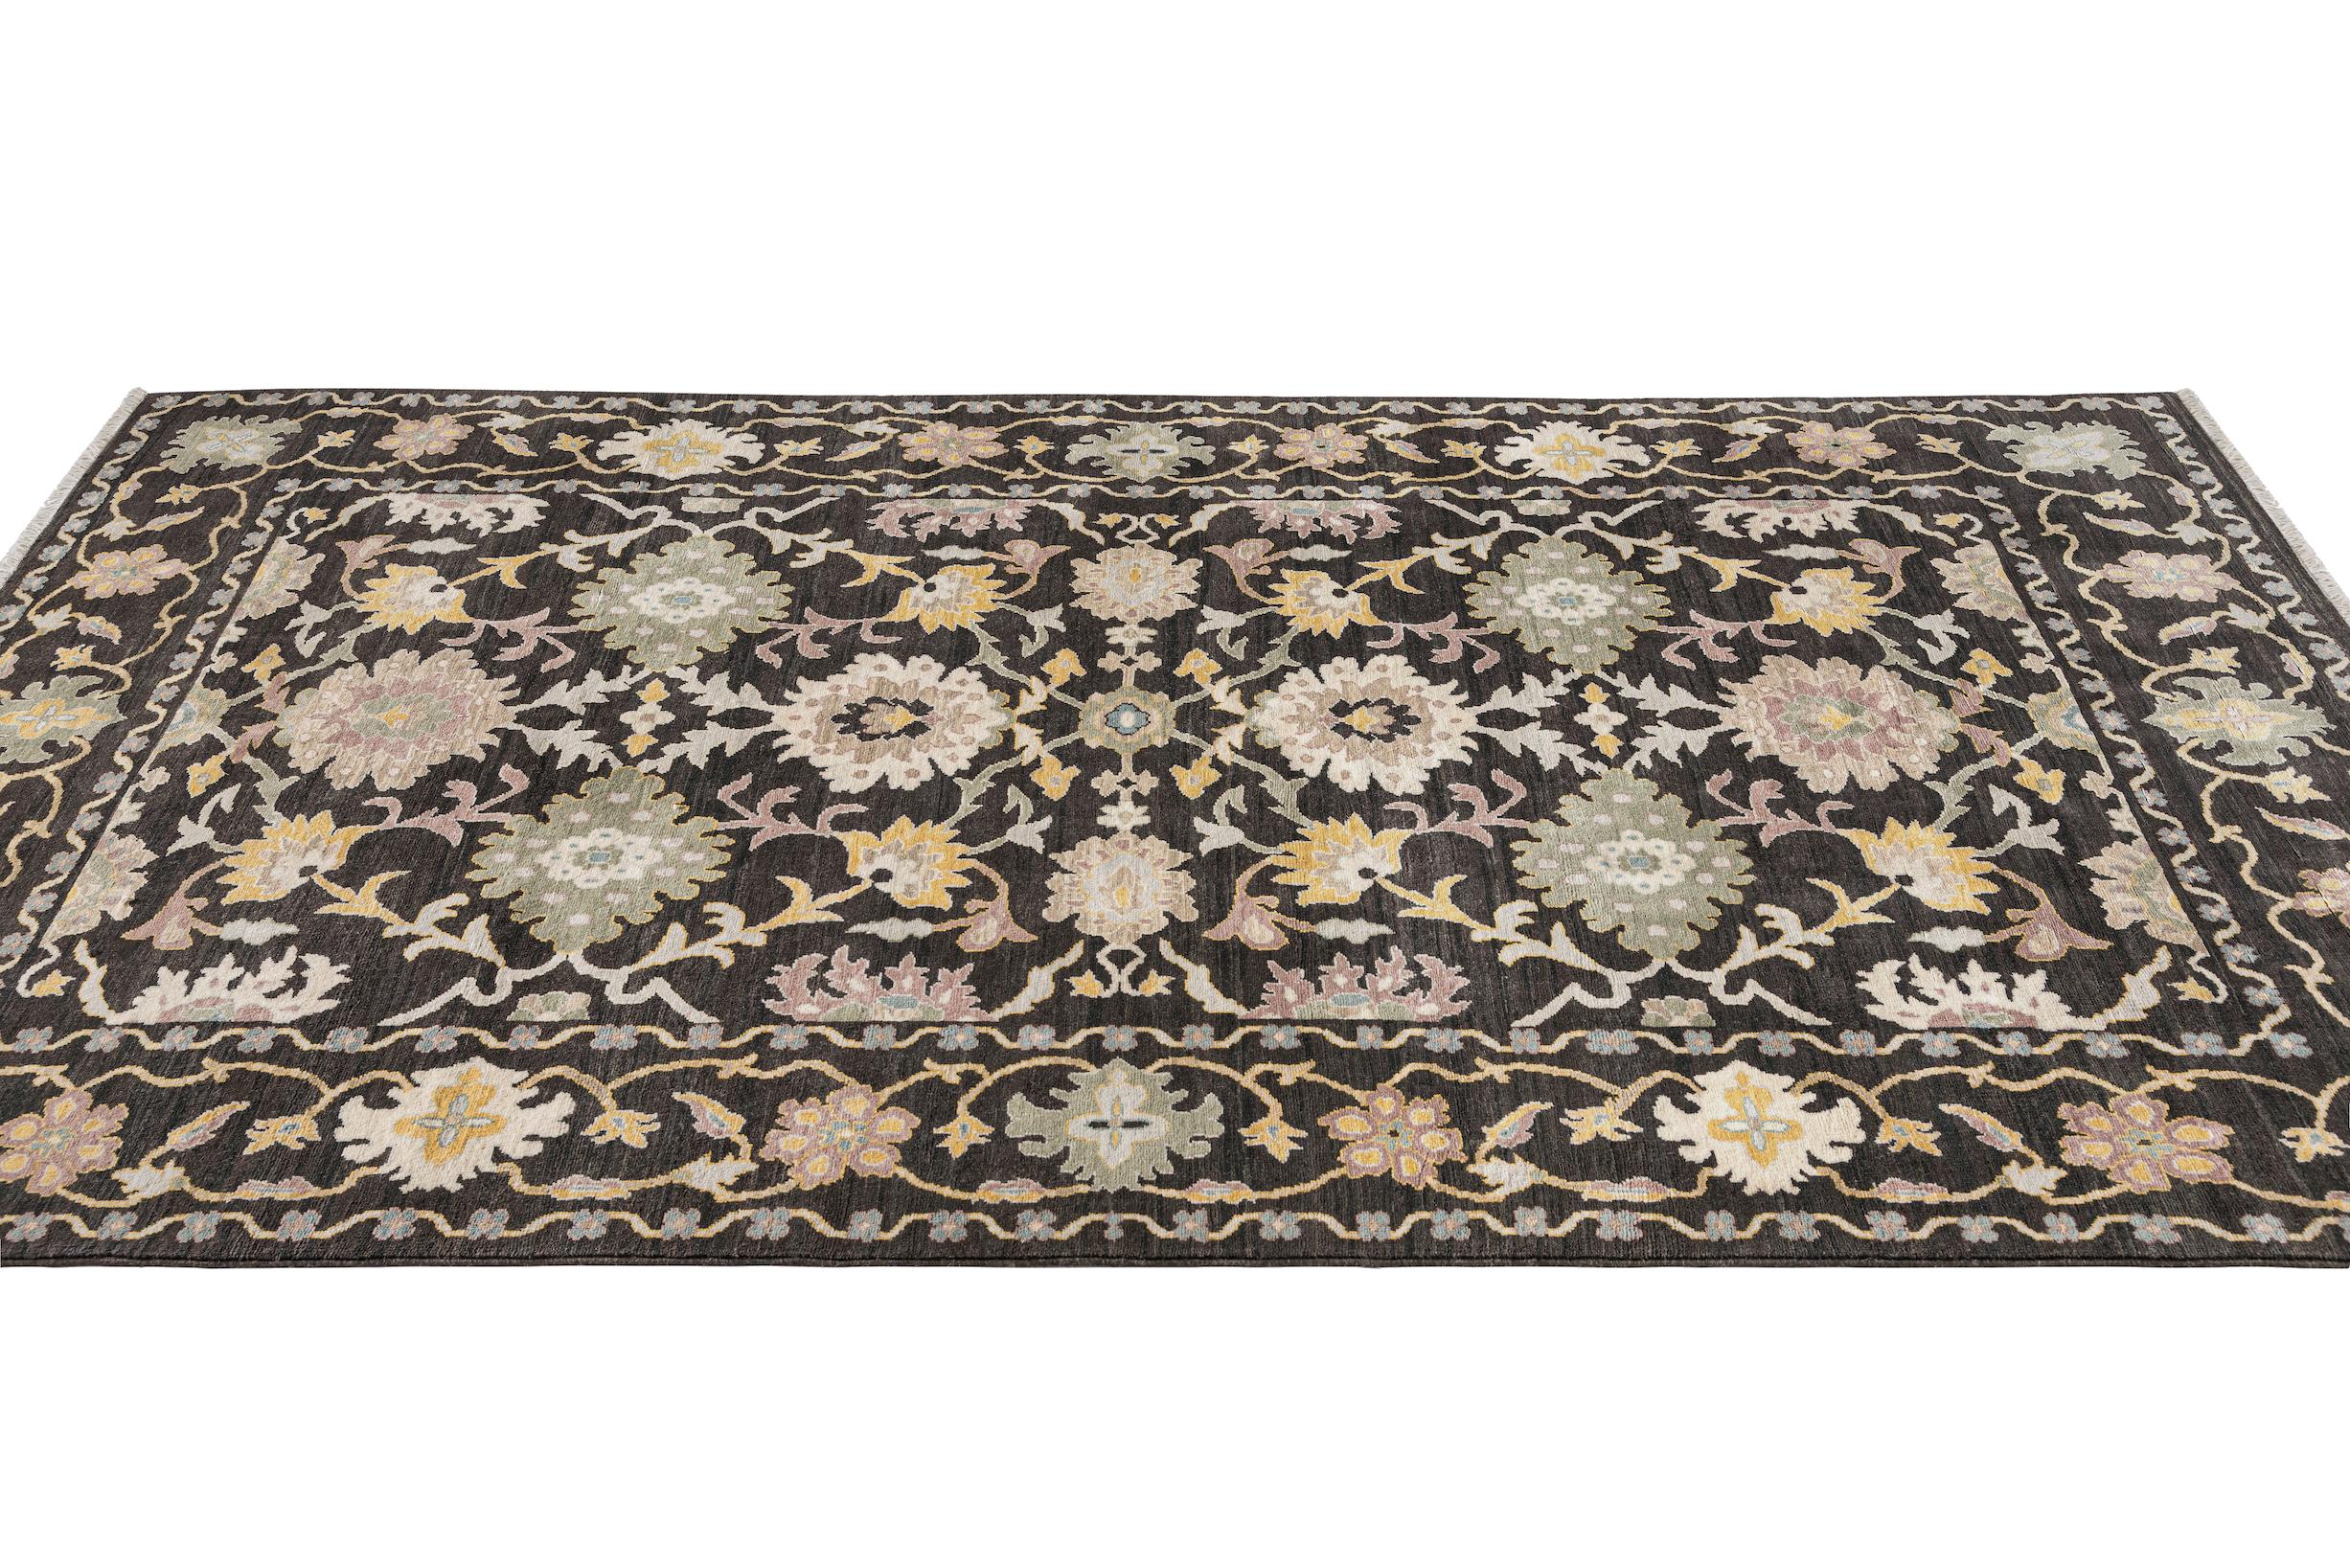 Contemporary 21st Century Hand-Knotted Egyptian Ziegler Rug in Charcoal Grey Floral Pattern For Sale